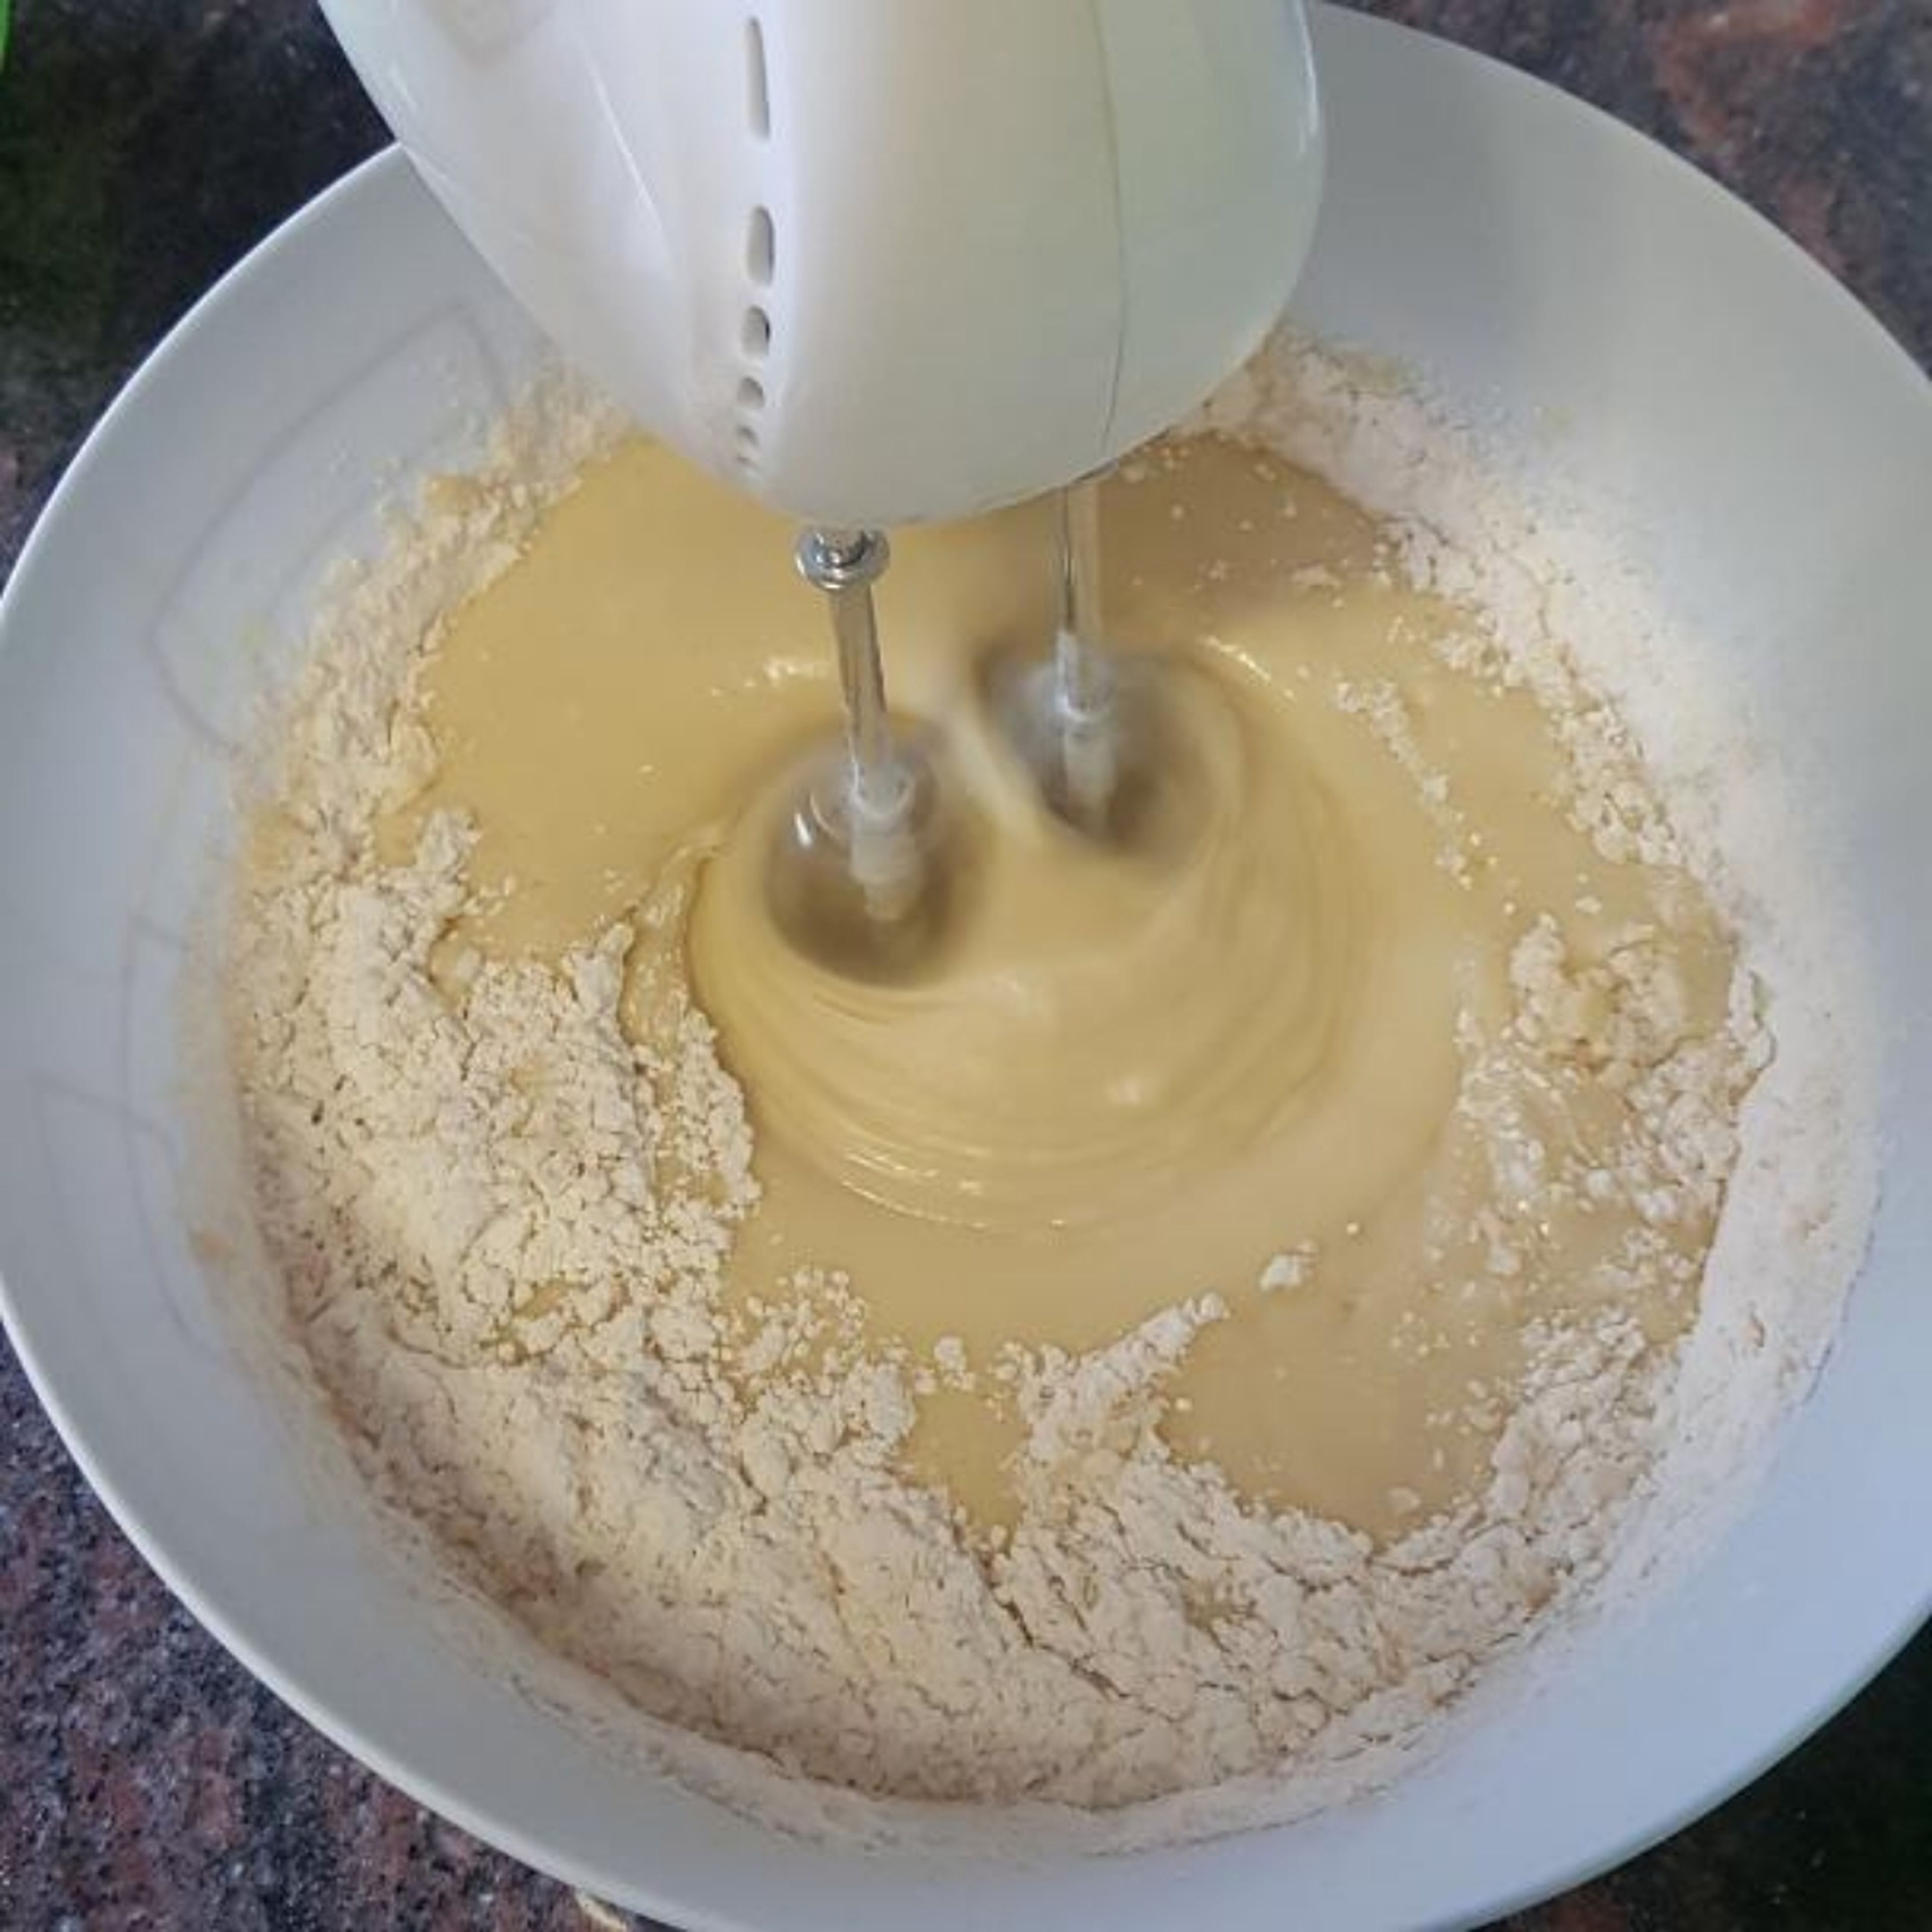 add the flour mixture to the eggs mixture and mix them with the electrical mixer for 1 minute